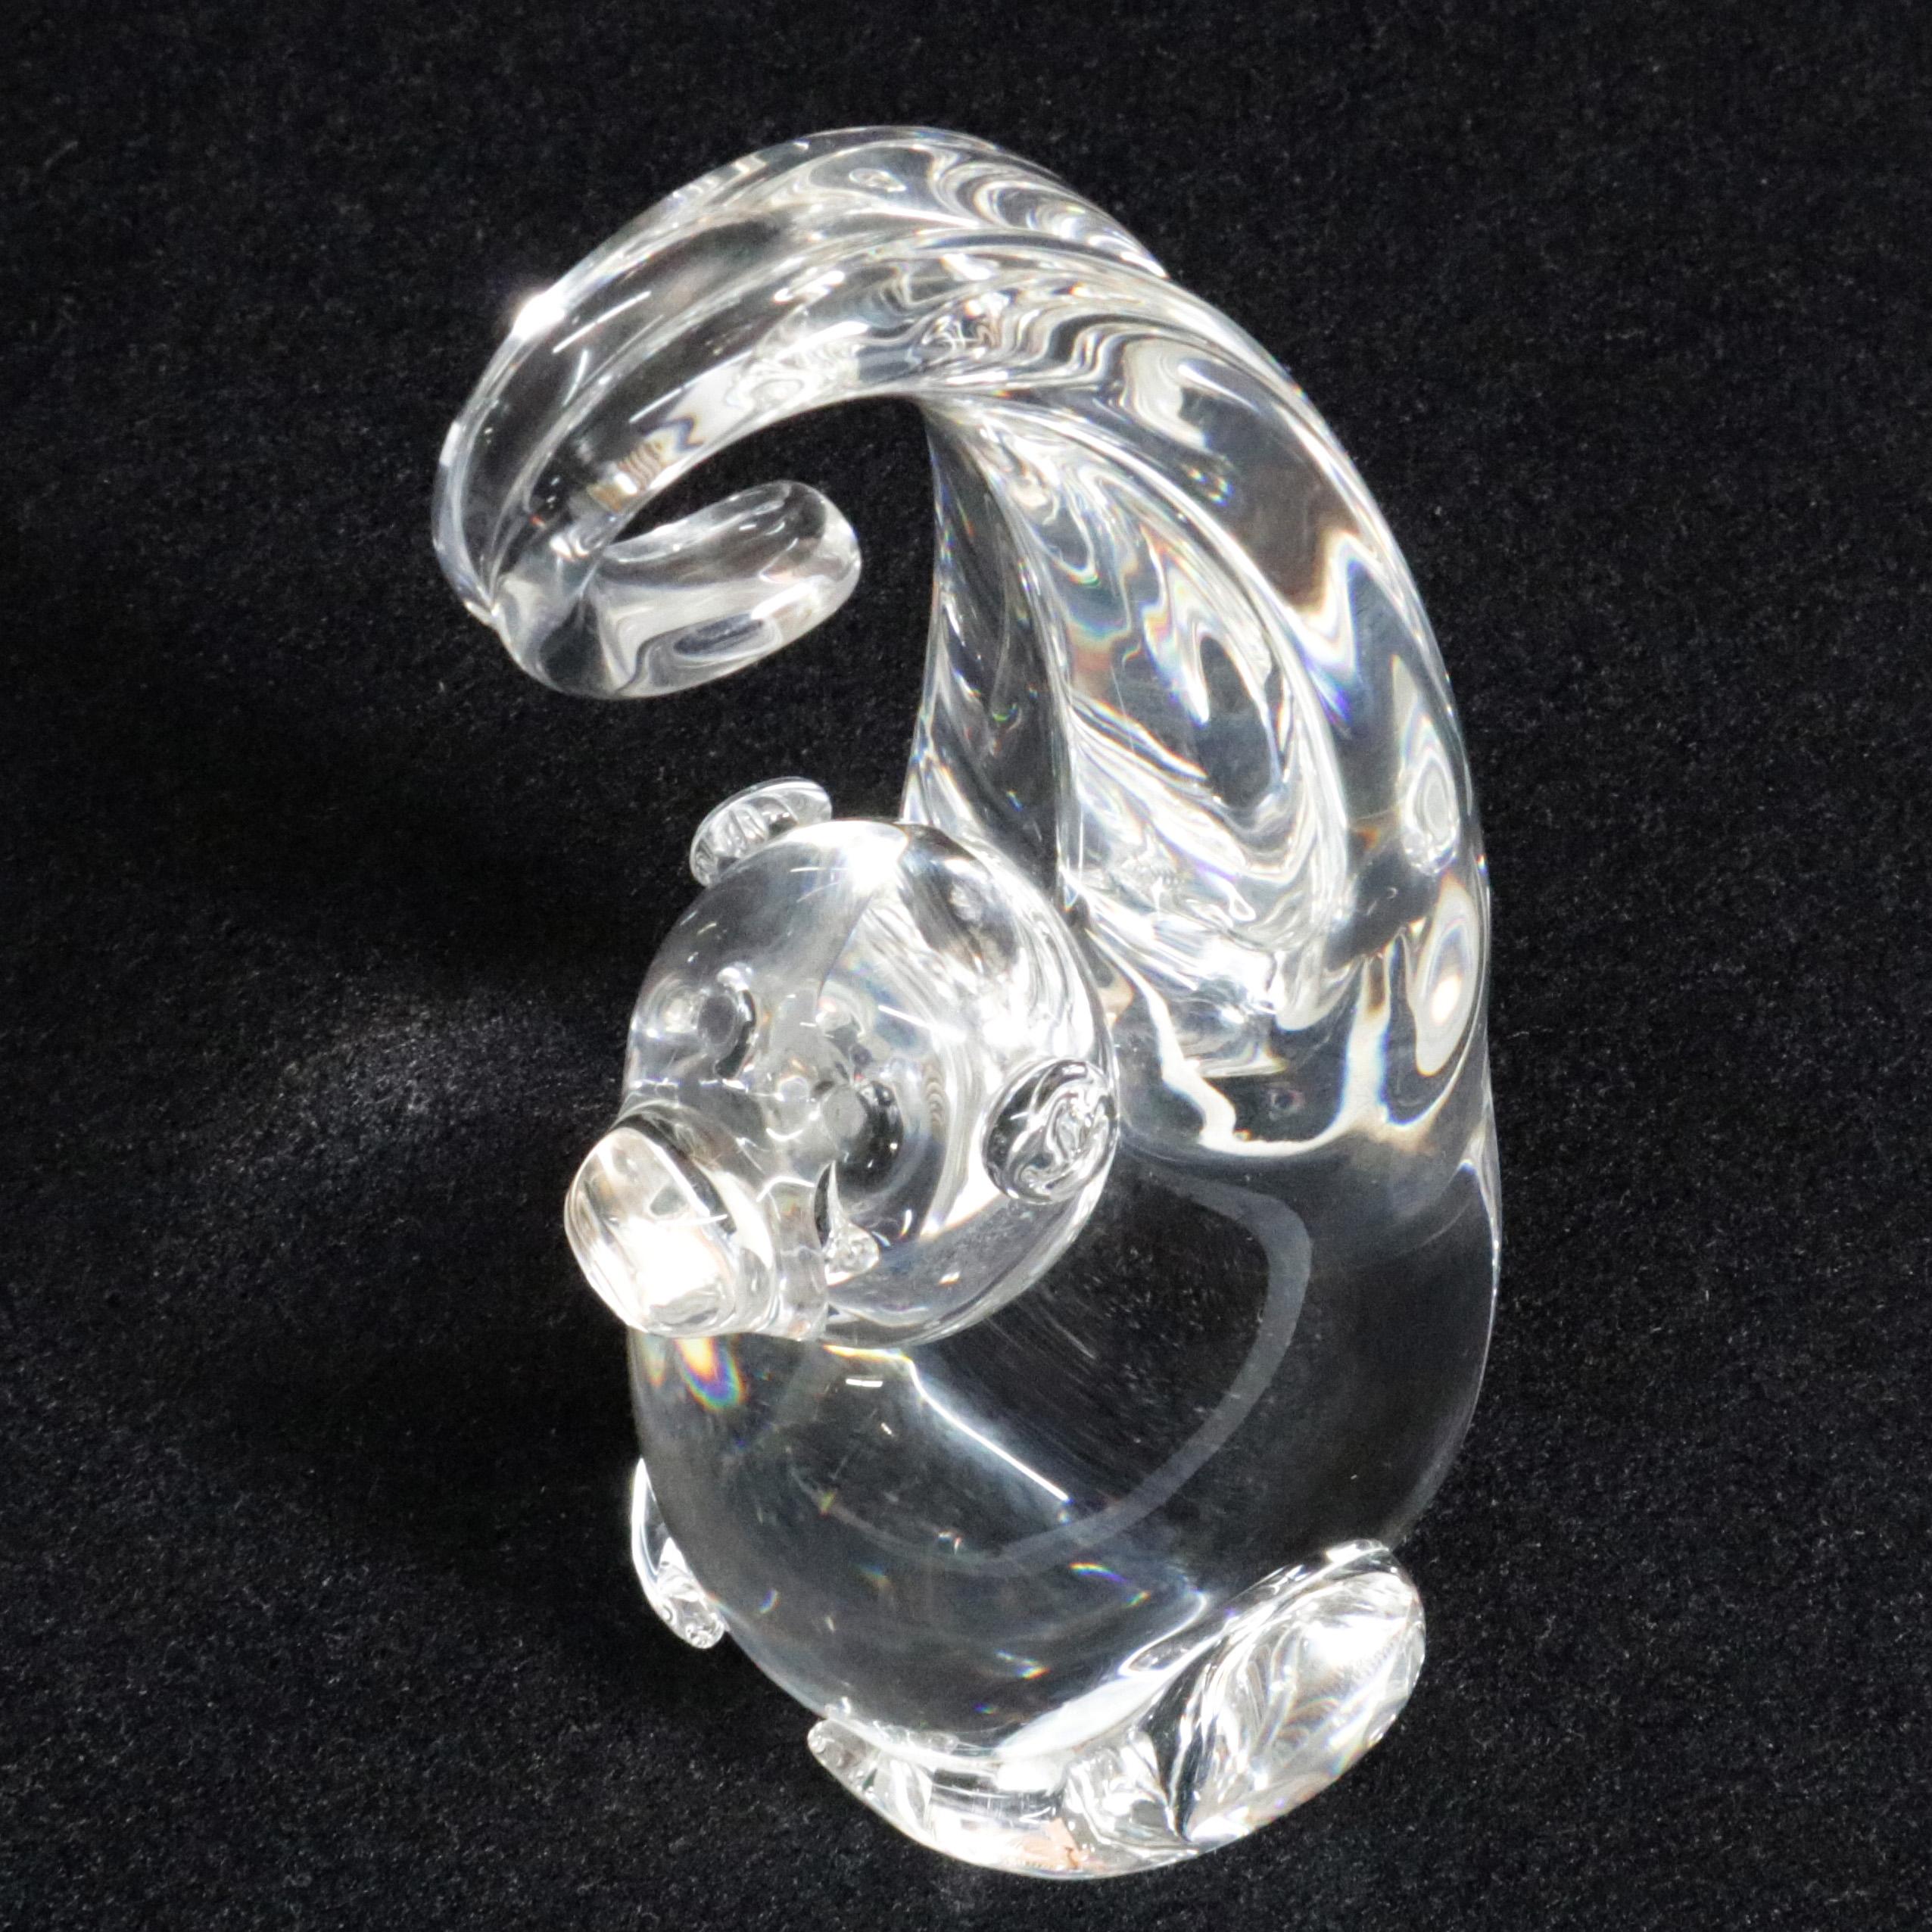 Mid-Century Modern Steuben Figurative Crystal Sculpture Monkey Paperweight by de Sousa, Signed